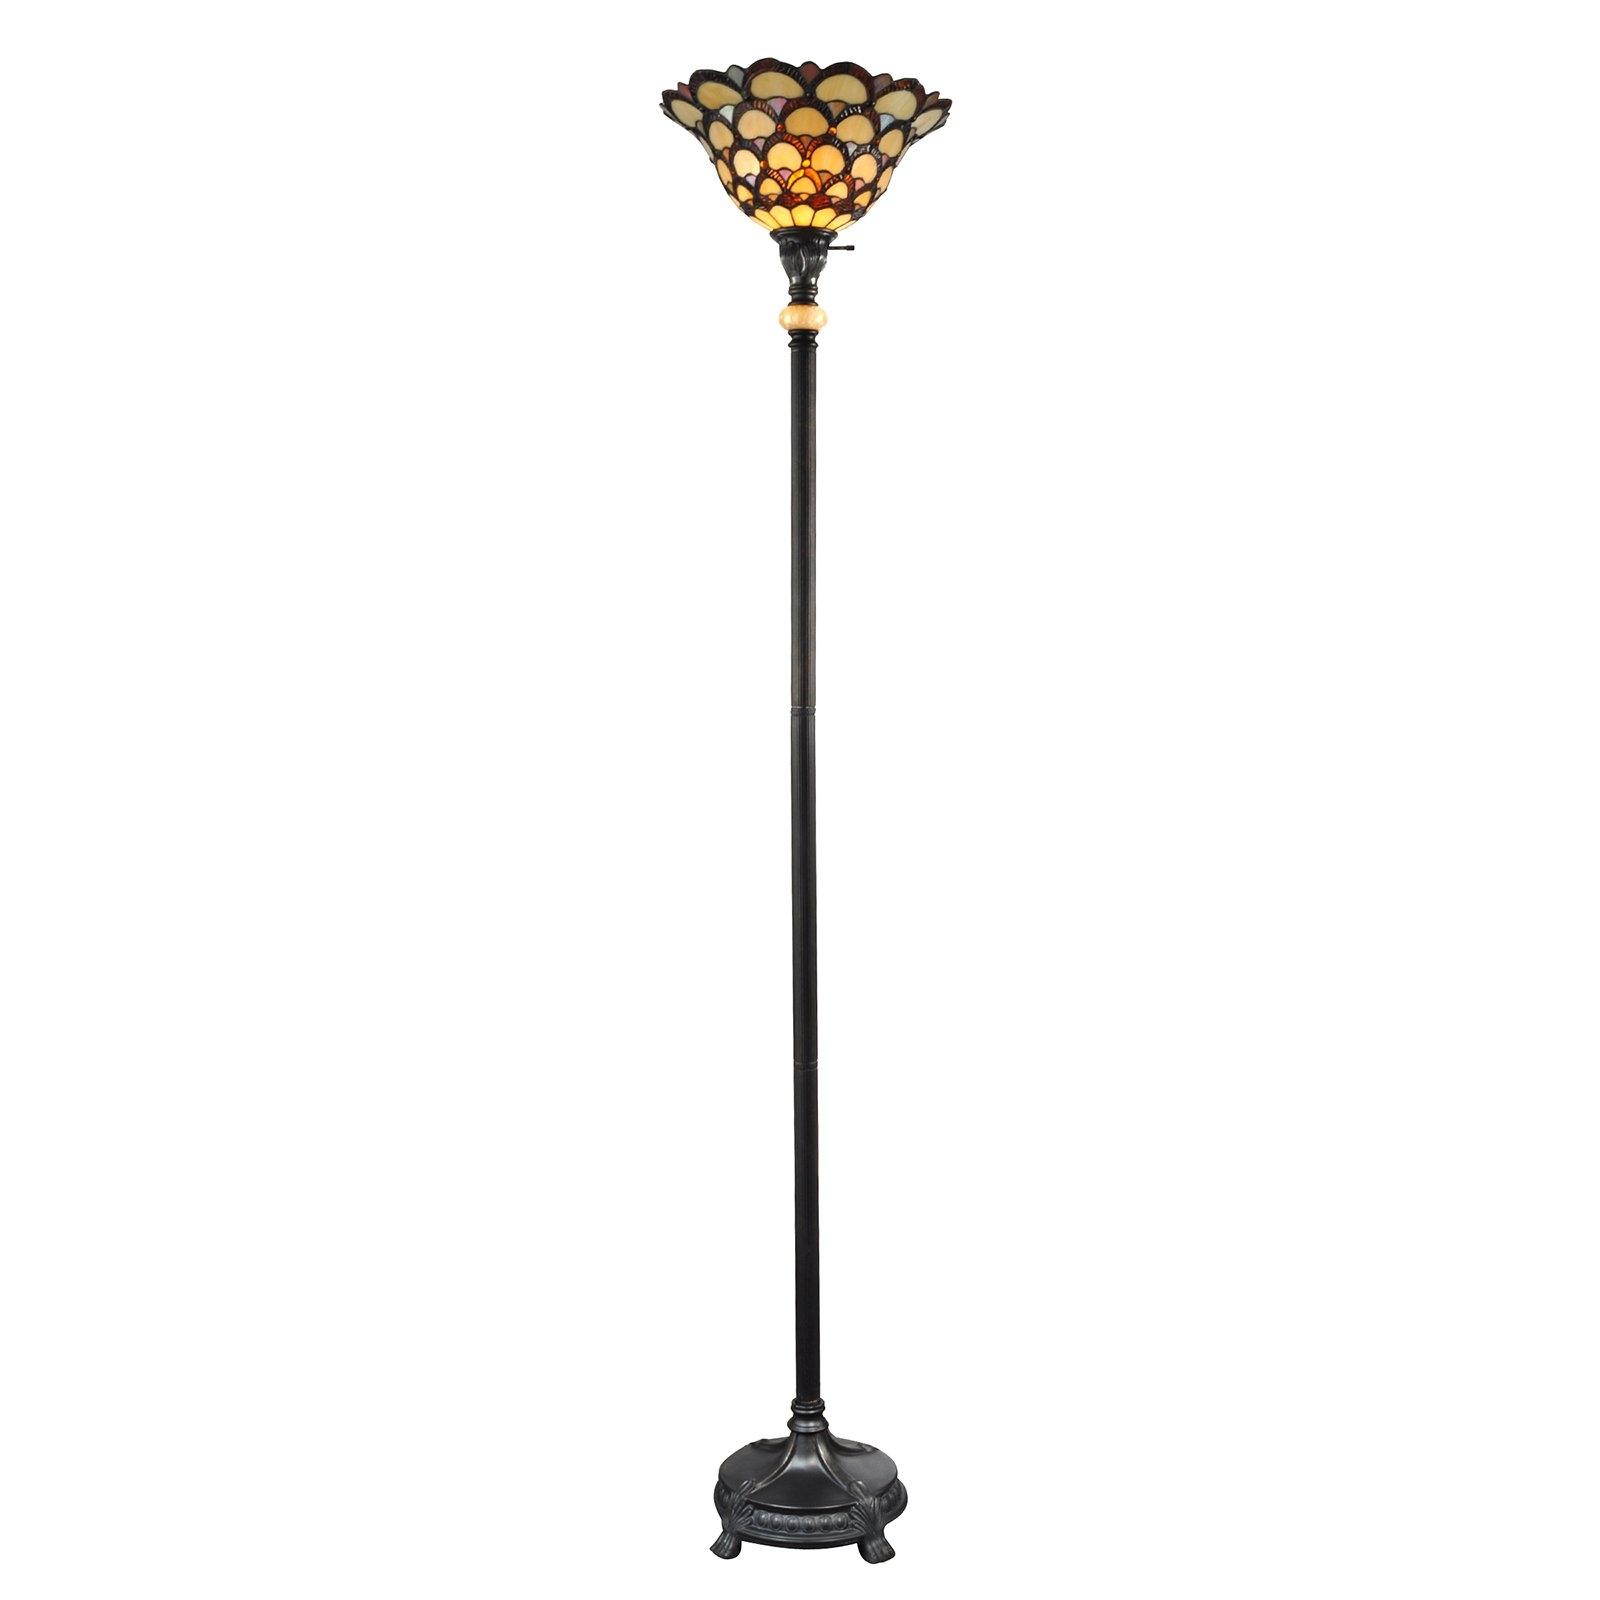 Dale Tiffany Peacock Torchiere Floor Lamp Products In 2019 pertaining to dimensions 1600 X 1600